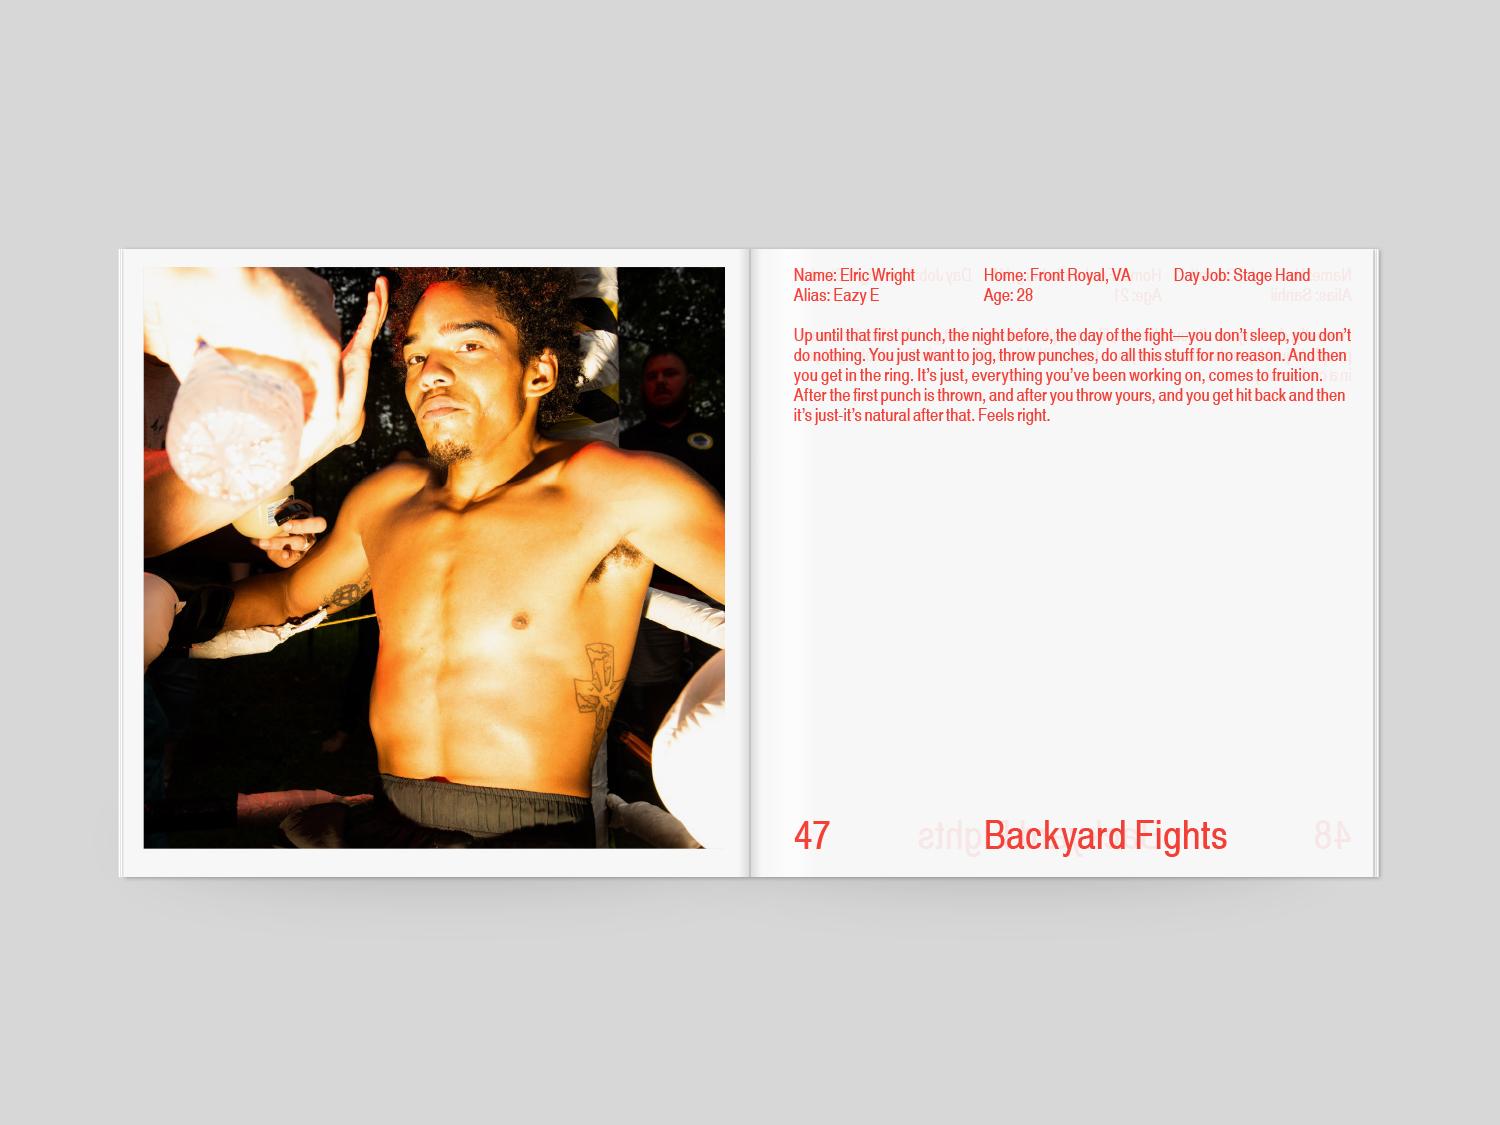 
Backyard Fights
Hat & Beard Press, 2022
Softcover, with rotating paper stocks, 124 pages
10.25 inches x 10.25 inches
Signed, $125

“You fight it out. And then, after that, you hug it out, and you become friends. You know, you become closer,